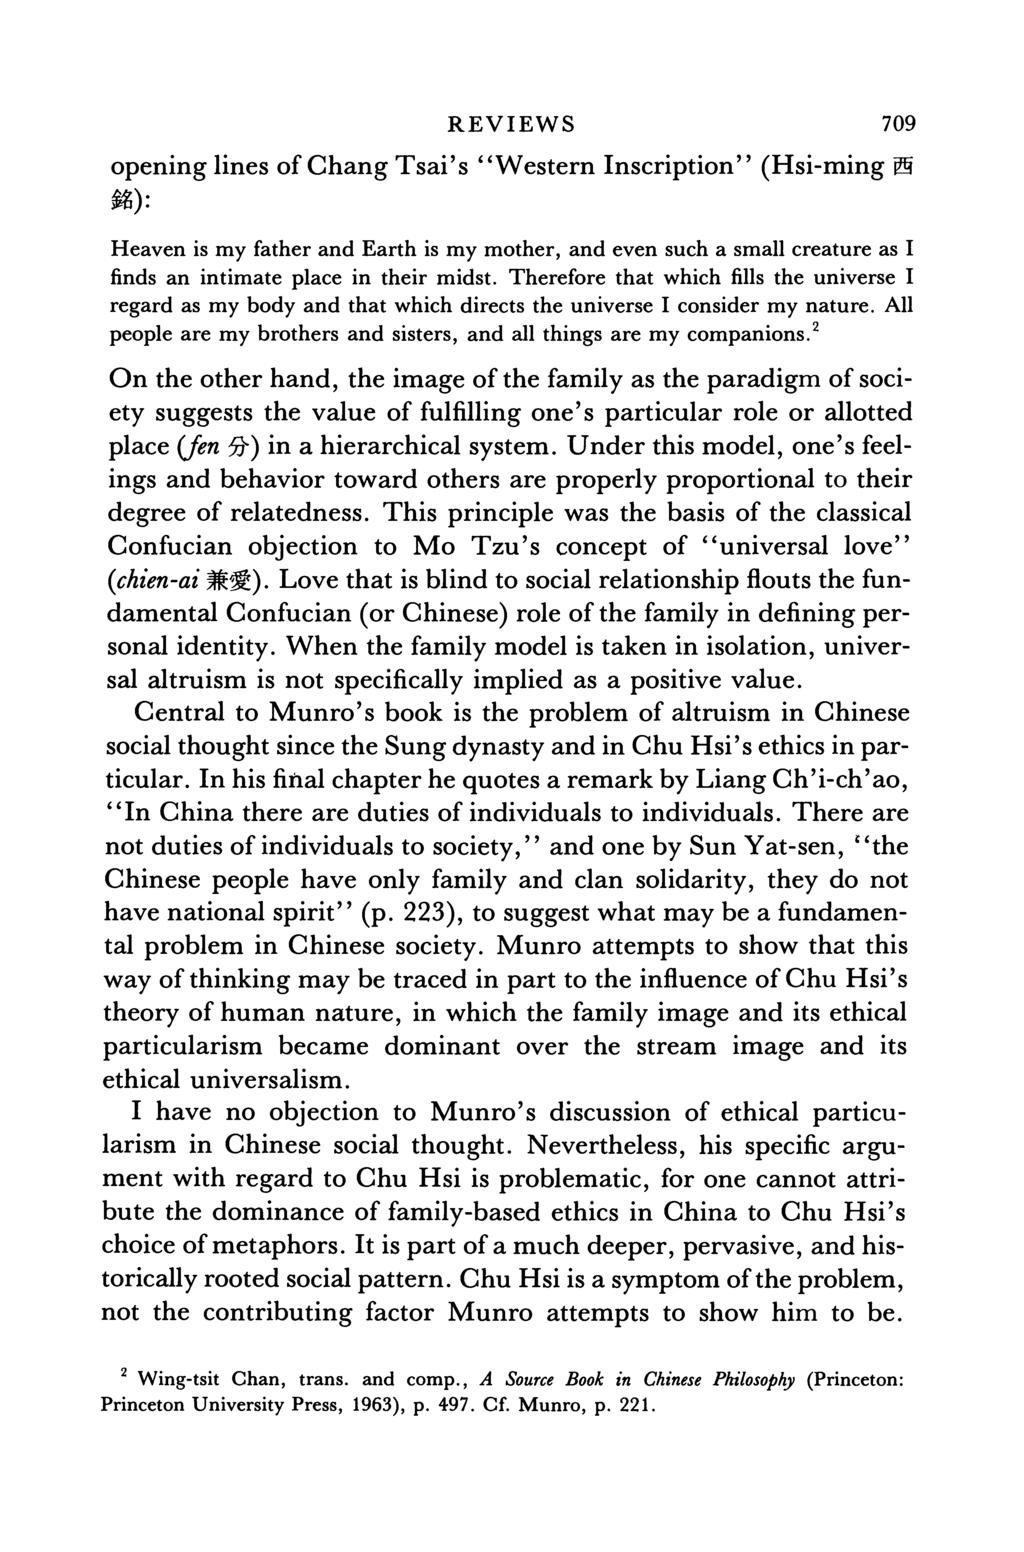 REVIEWS 709 opening lines of Chang Tsai's "Western Inscription" (Hsi-ming A): Heaven is my father and Earth is my mother, and even such a small creature as I finds an intimate place in their midst.